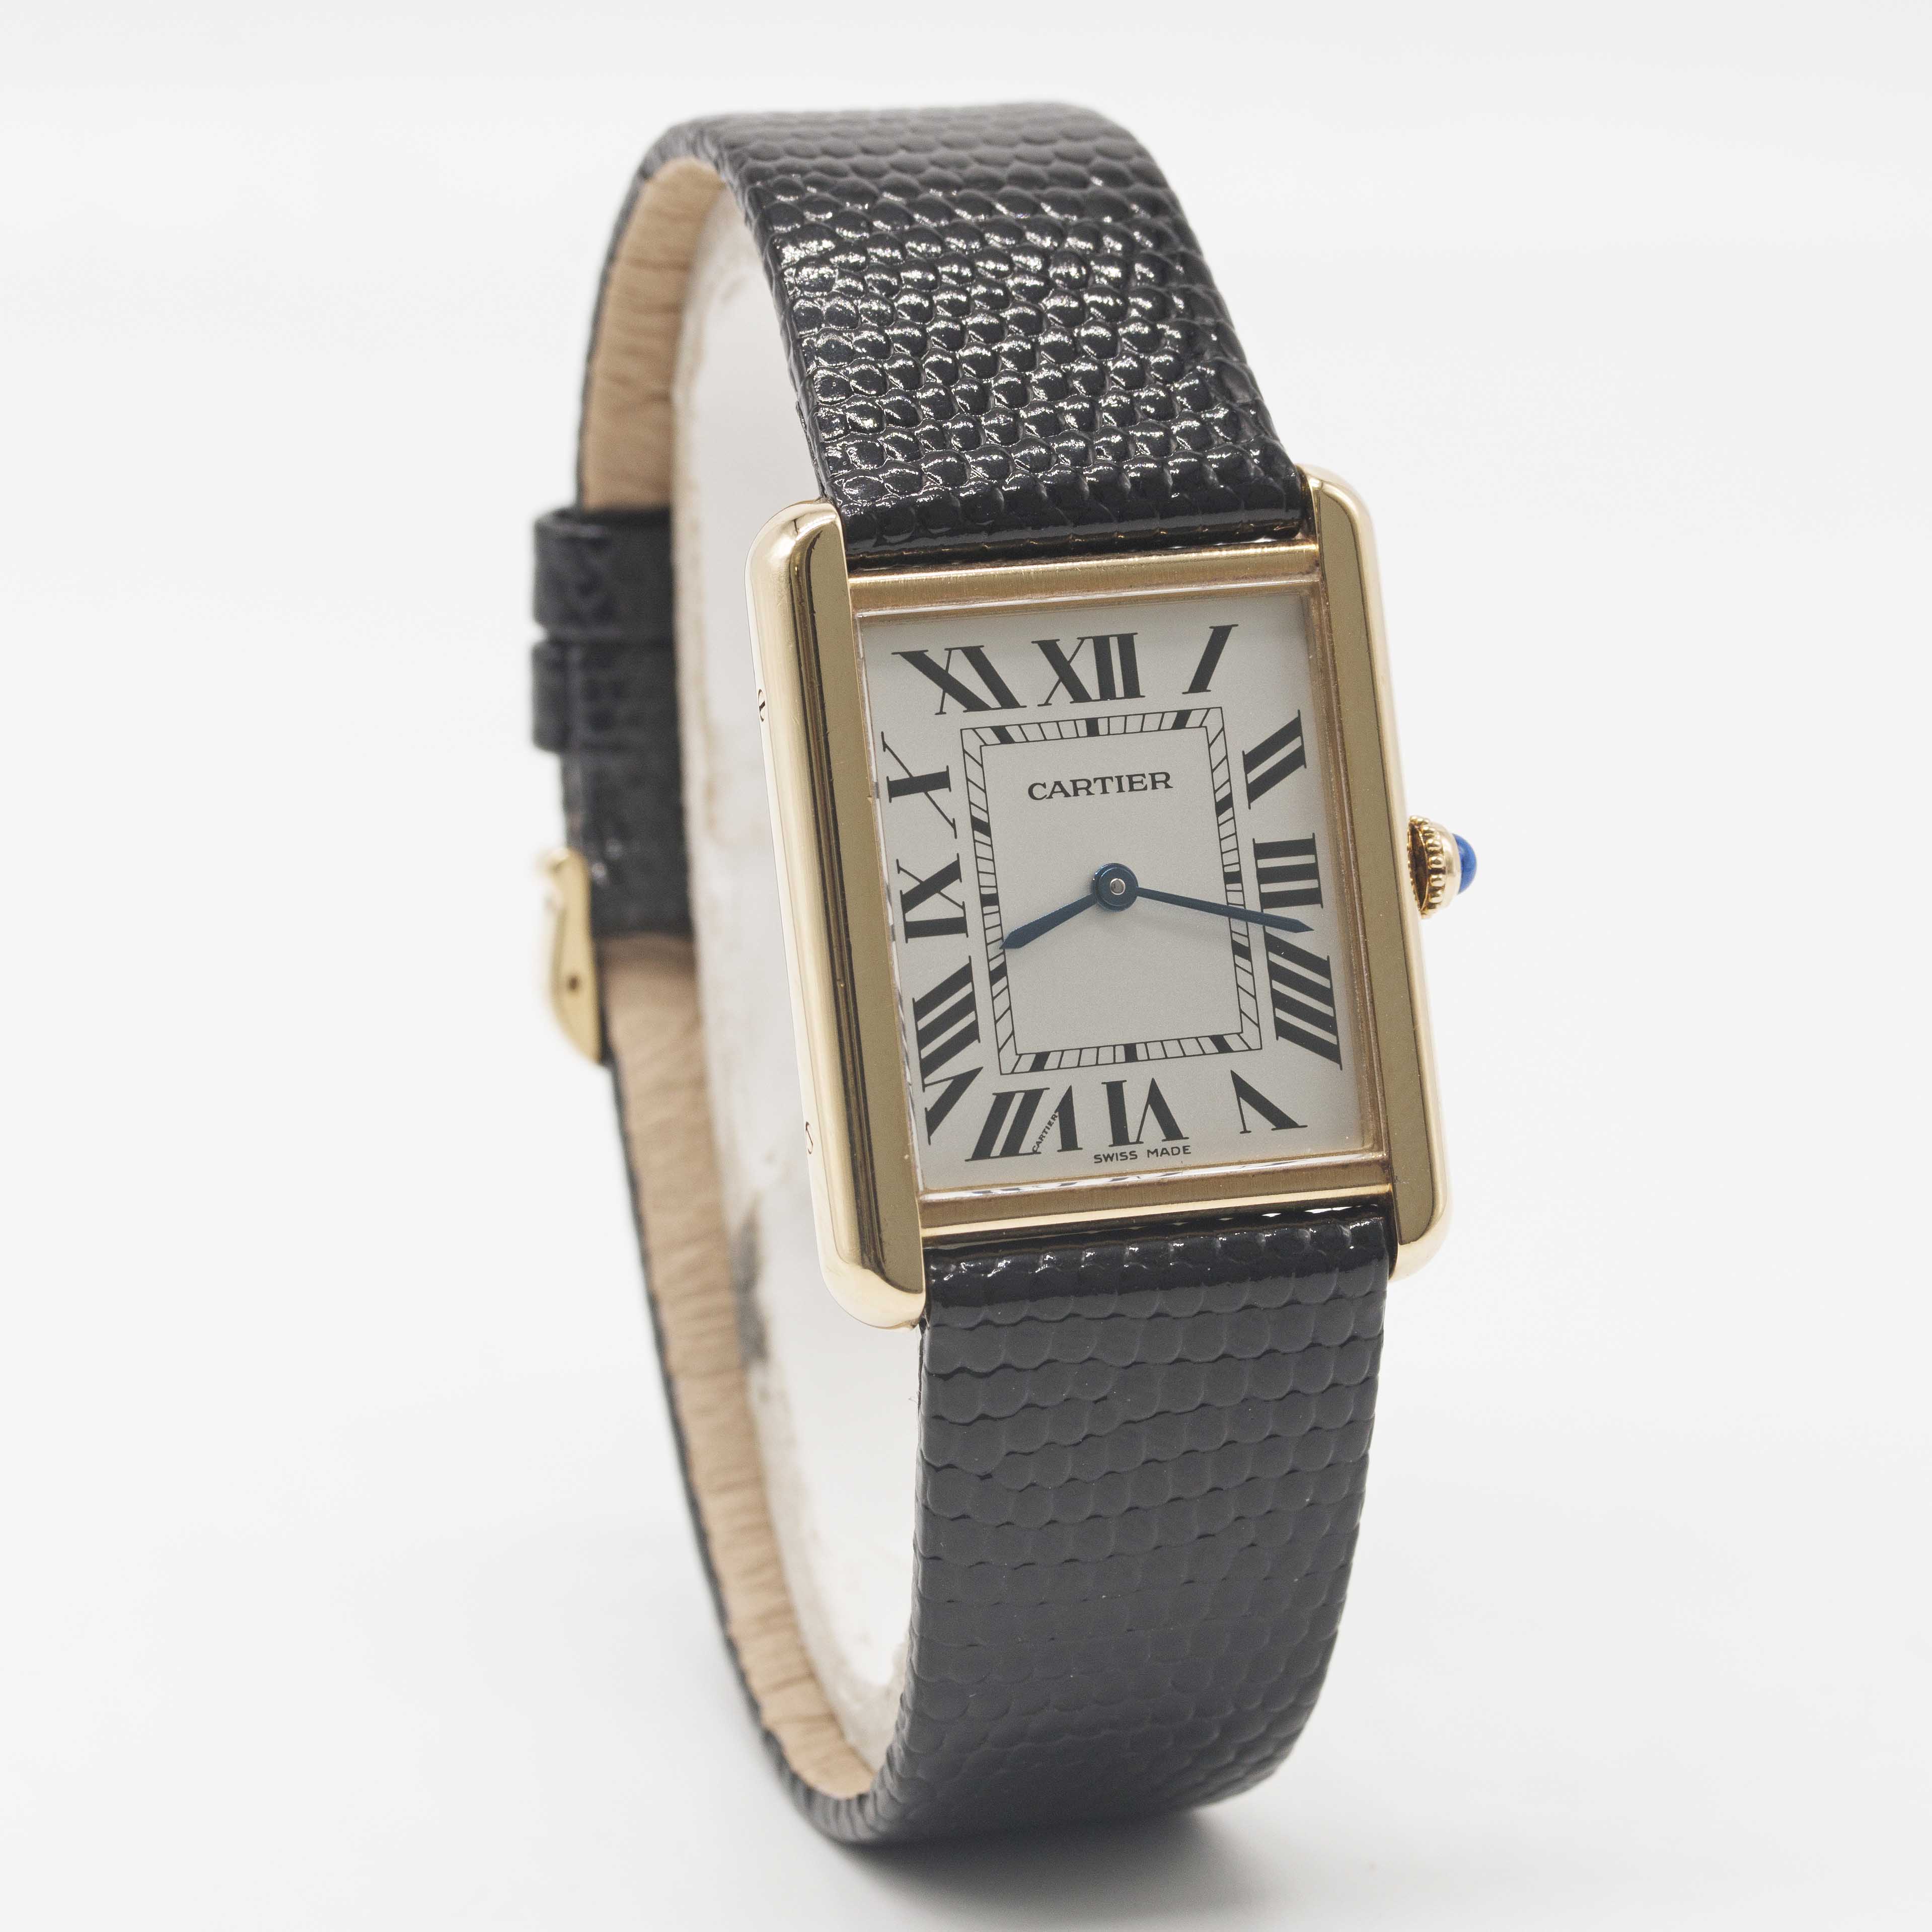 A GENTLEMAN'S LARGE SIZE STEEL & SOLID GOLD CARTIER TANK SOLO WRIST WATCH DATED 2007, REF. 2742 WITH - Image 4 of 8